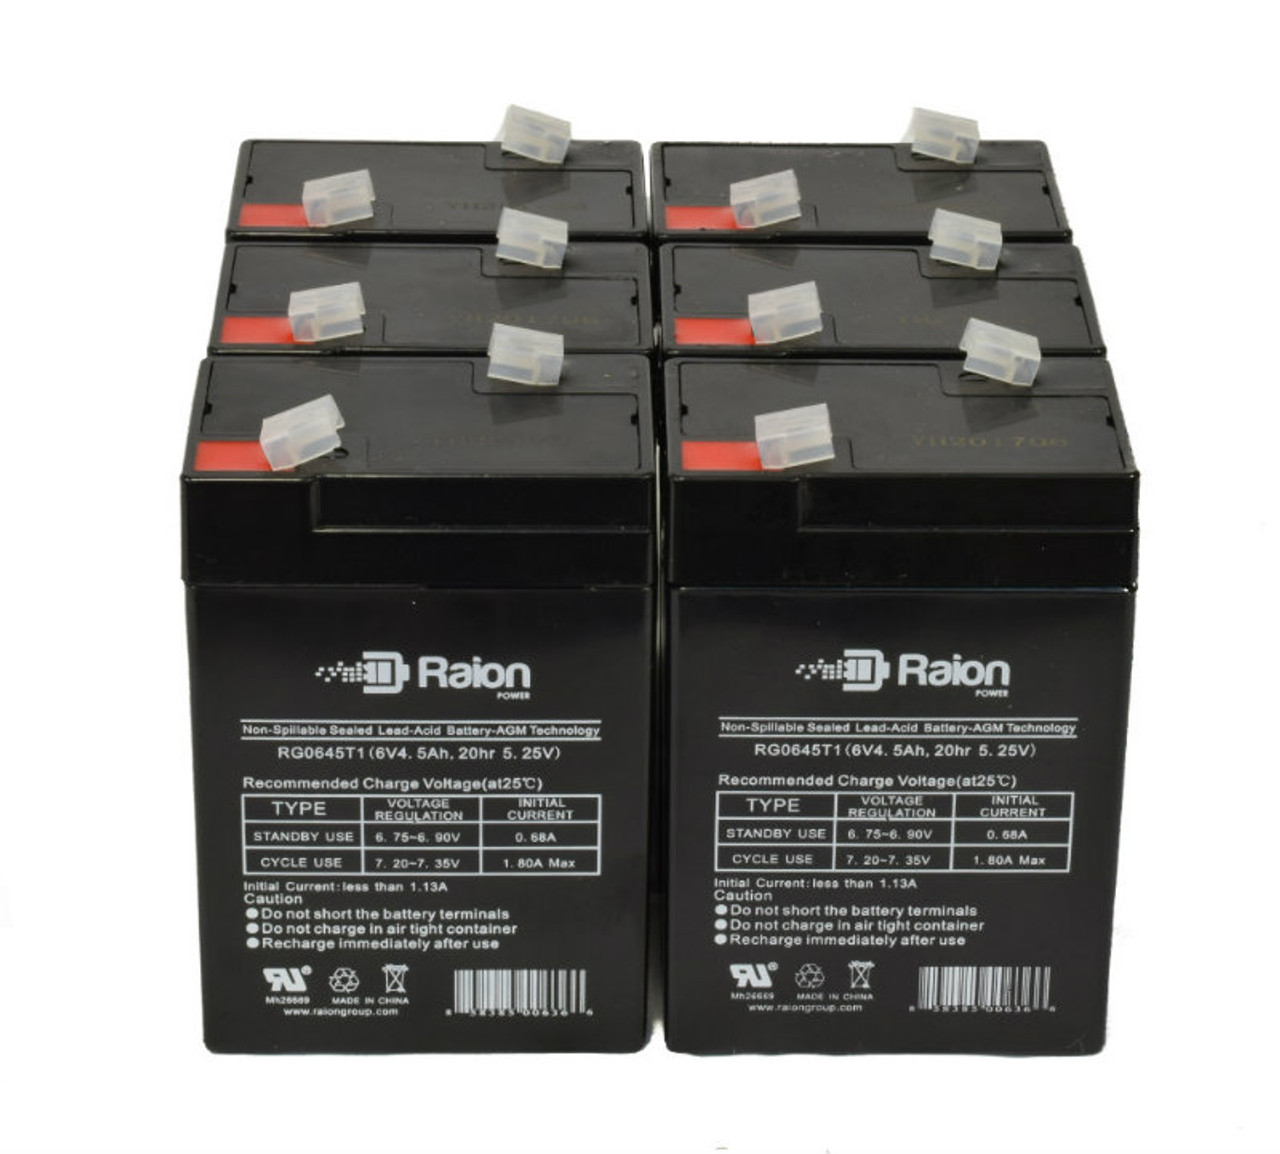 Raion Power 6 Volt 4.5Ah RG0645T1 Replacement Battery for Wei Long WP46 - 6 Pack